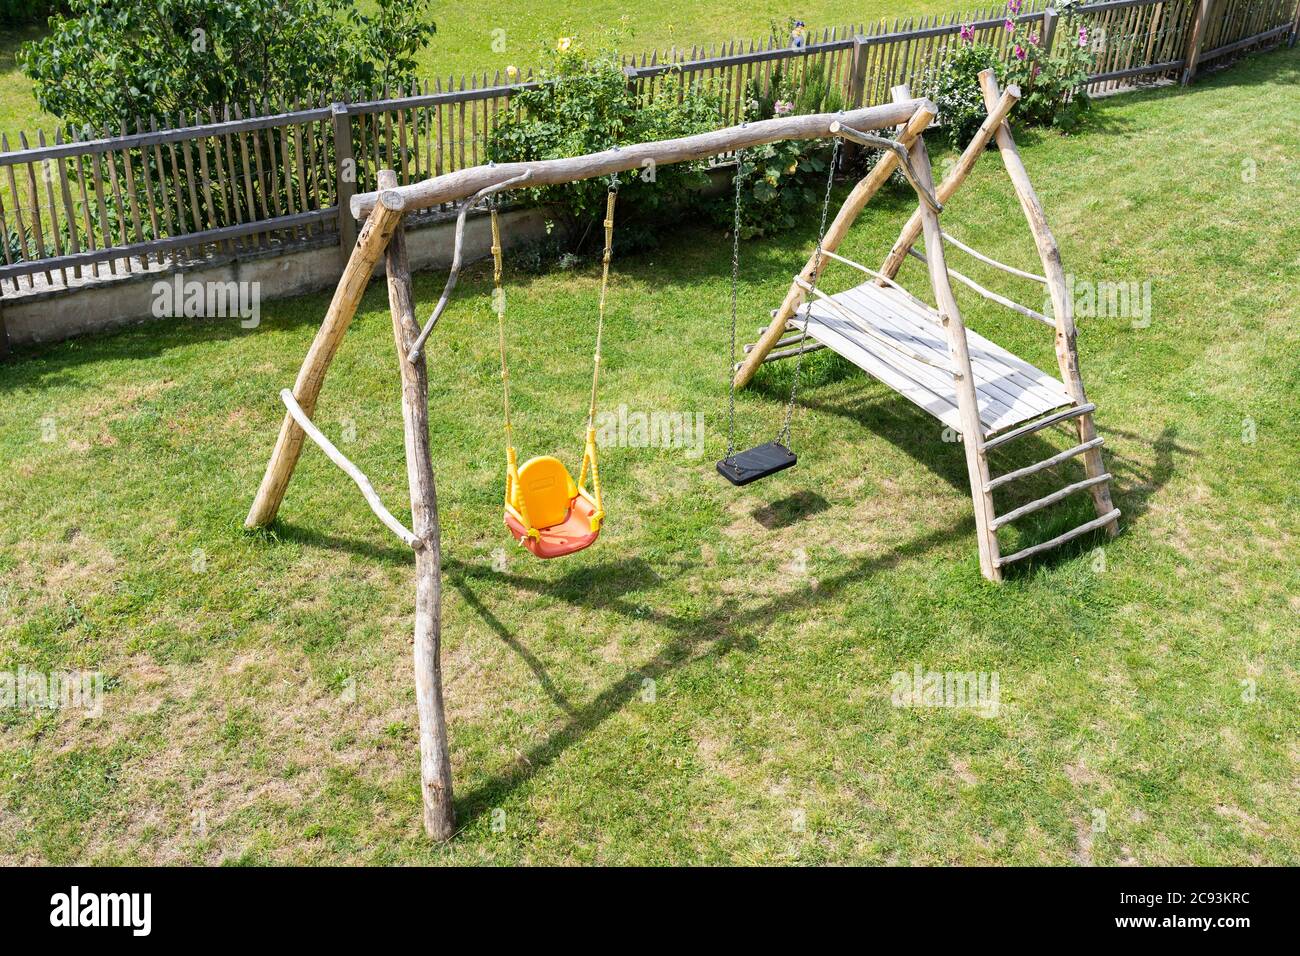 An environmentally friendly home-made wooden climbing frame and swings for children in a garden in Austria Stock Photo